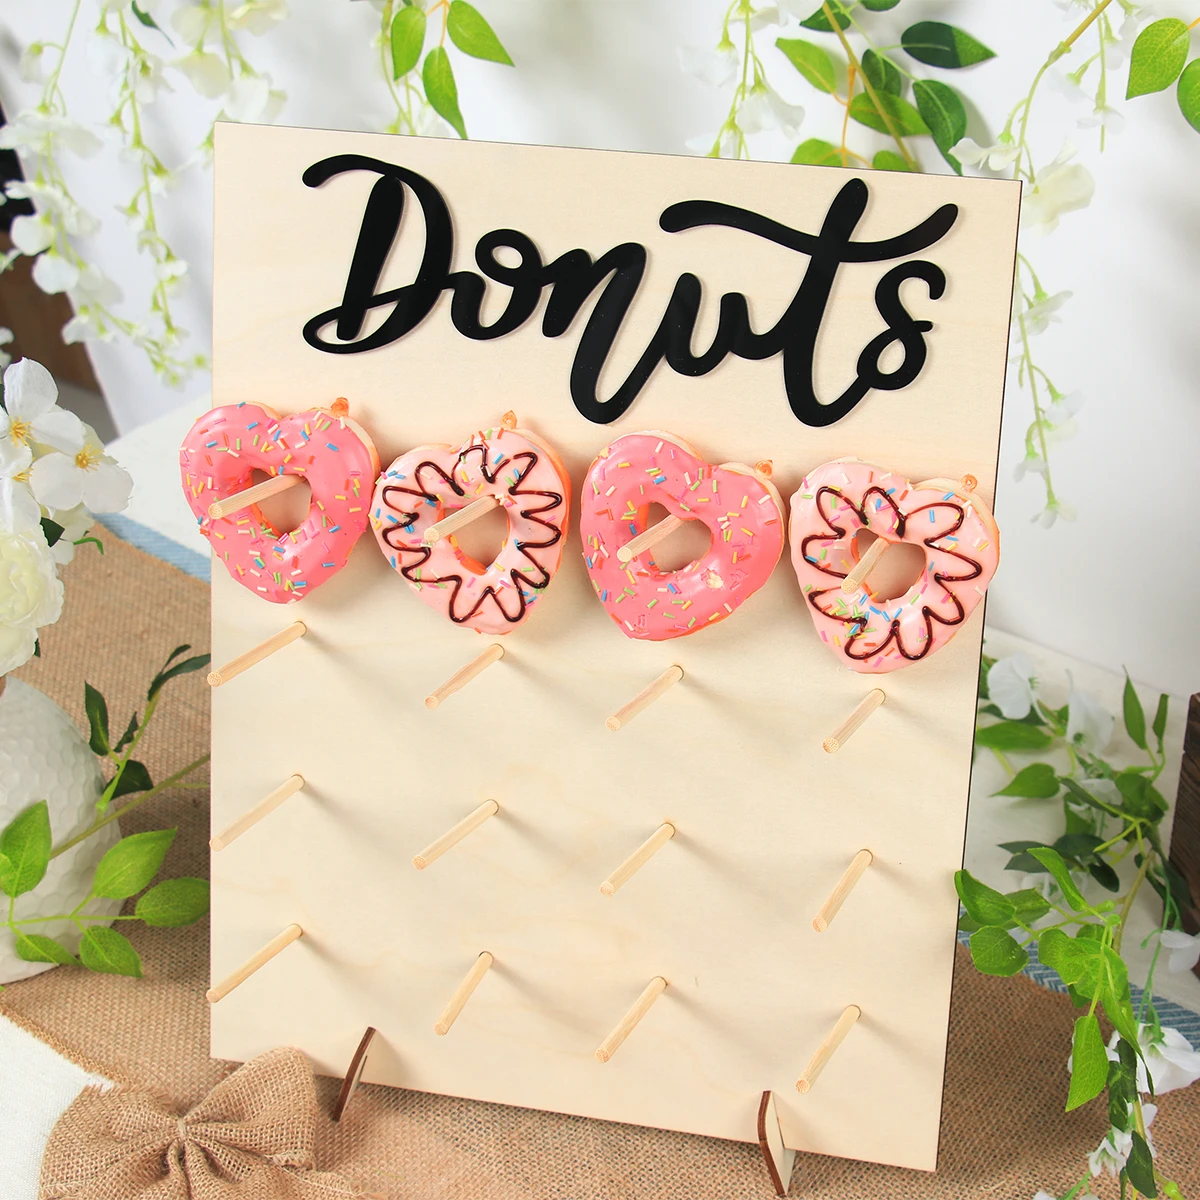 Wooden Donut Stand Wall Doughnut Holder Board Kids Birthday Party Table Decor Baby Shower Wedding Gender Reveal Party Supplies